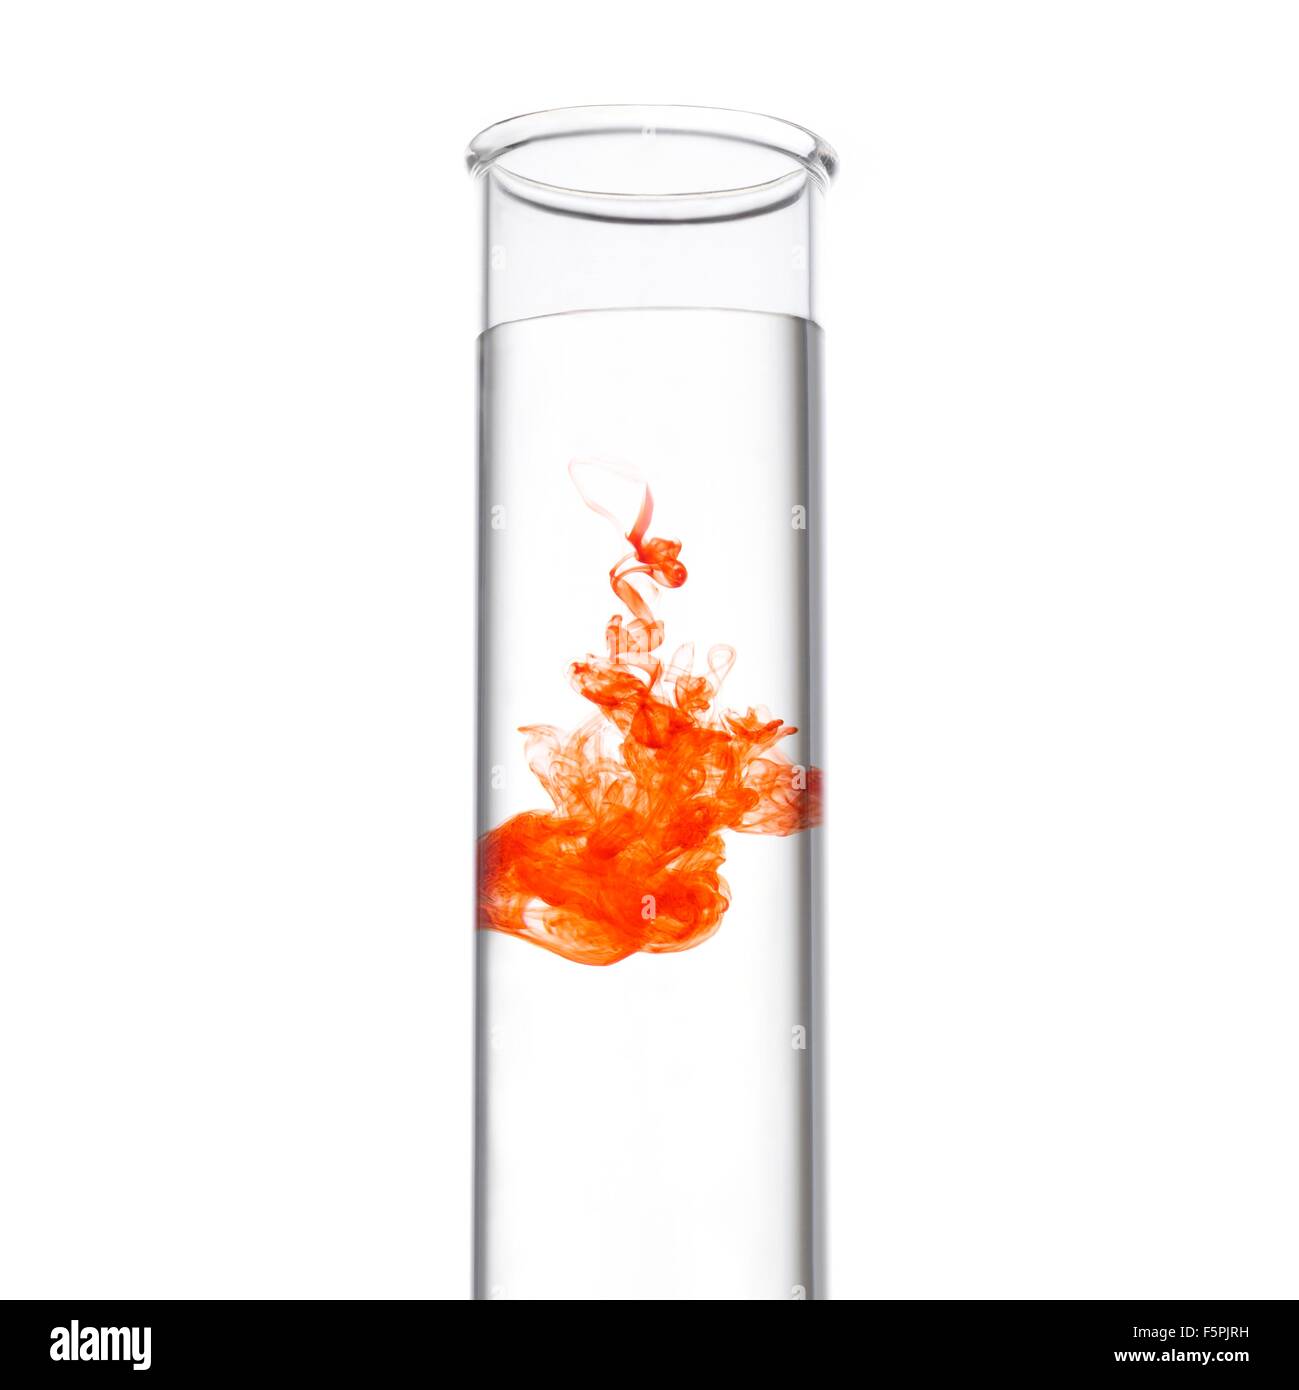 Red liquid in a test tube. Stock Photo